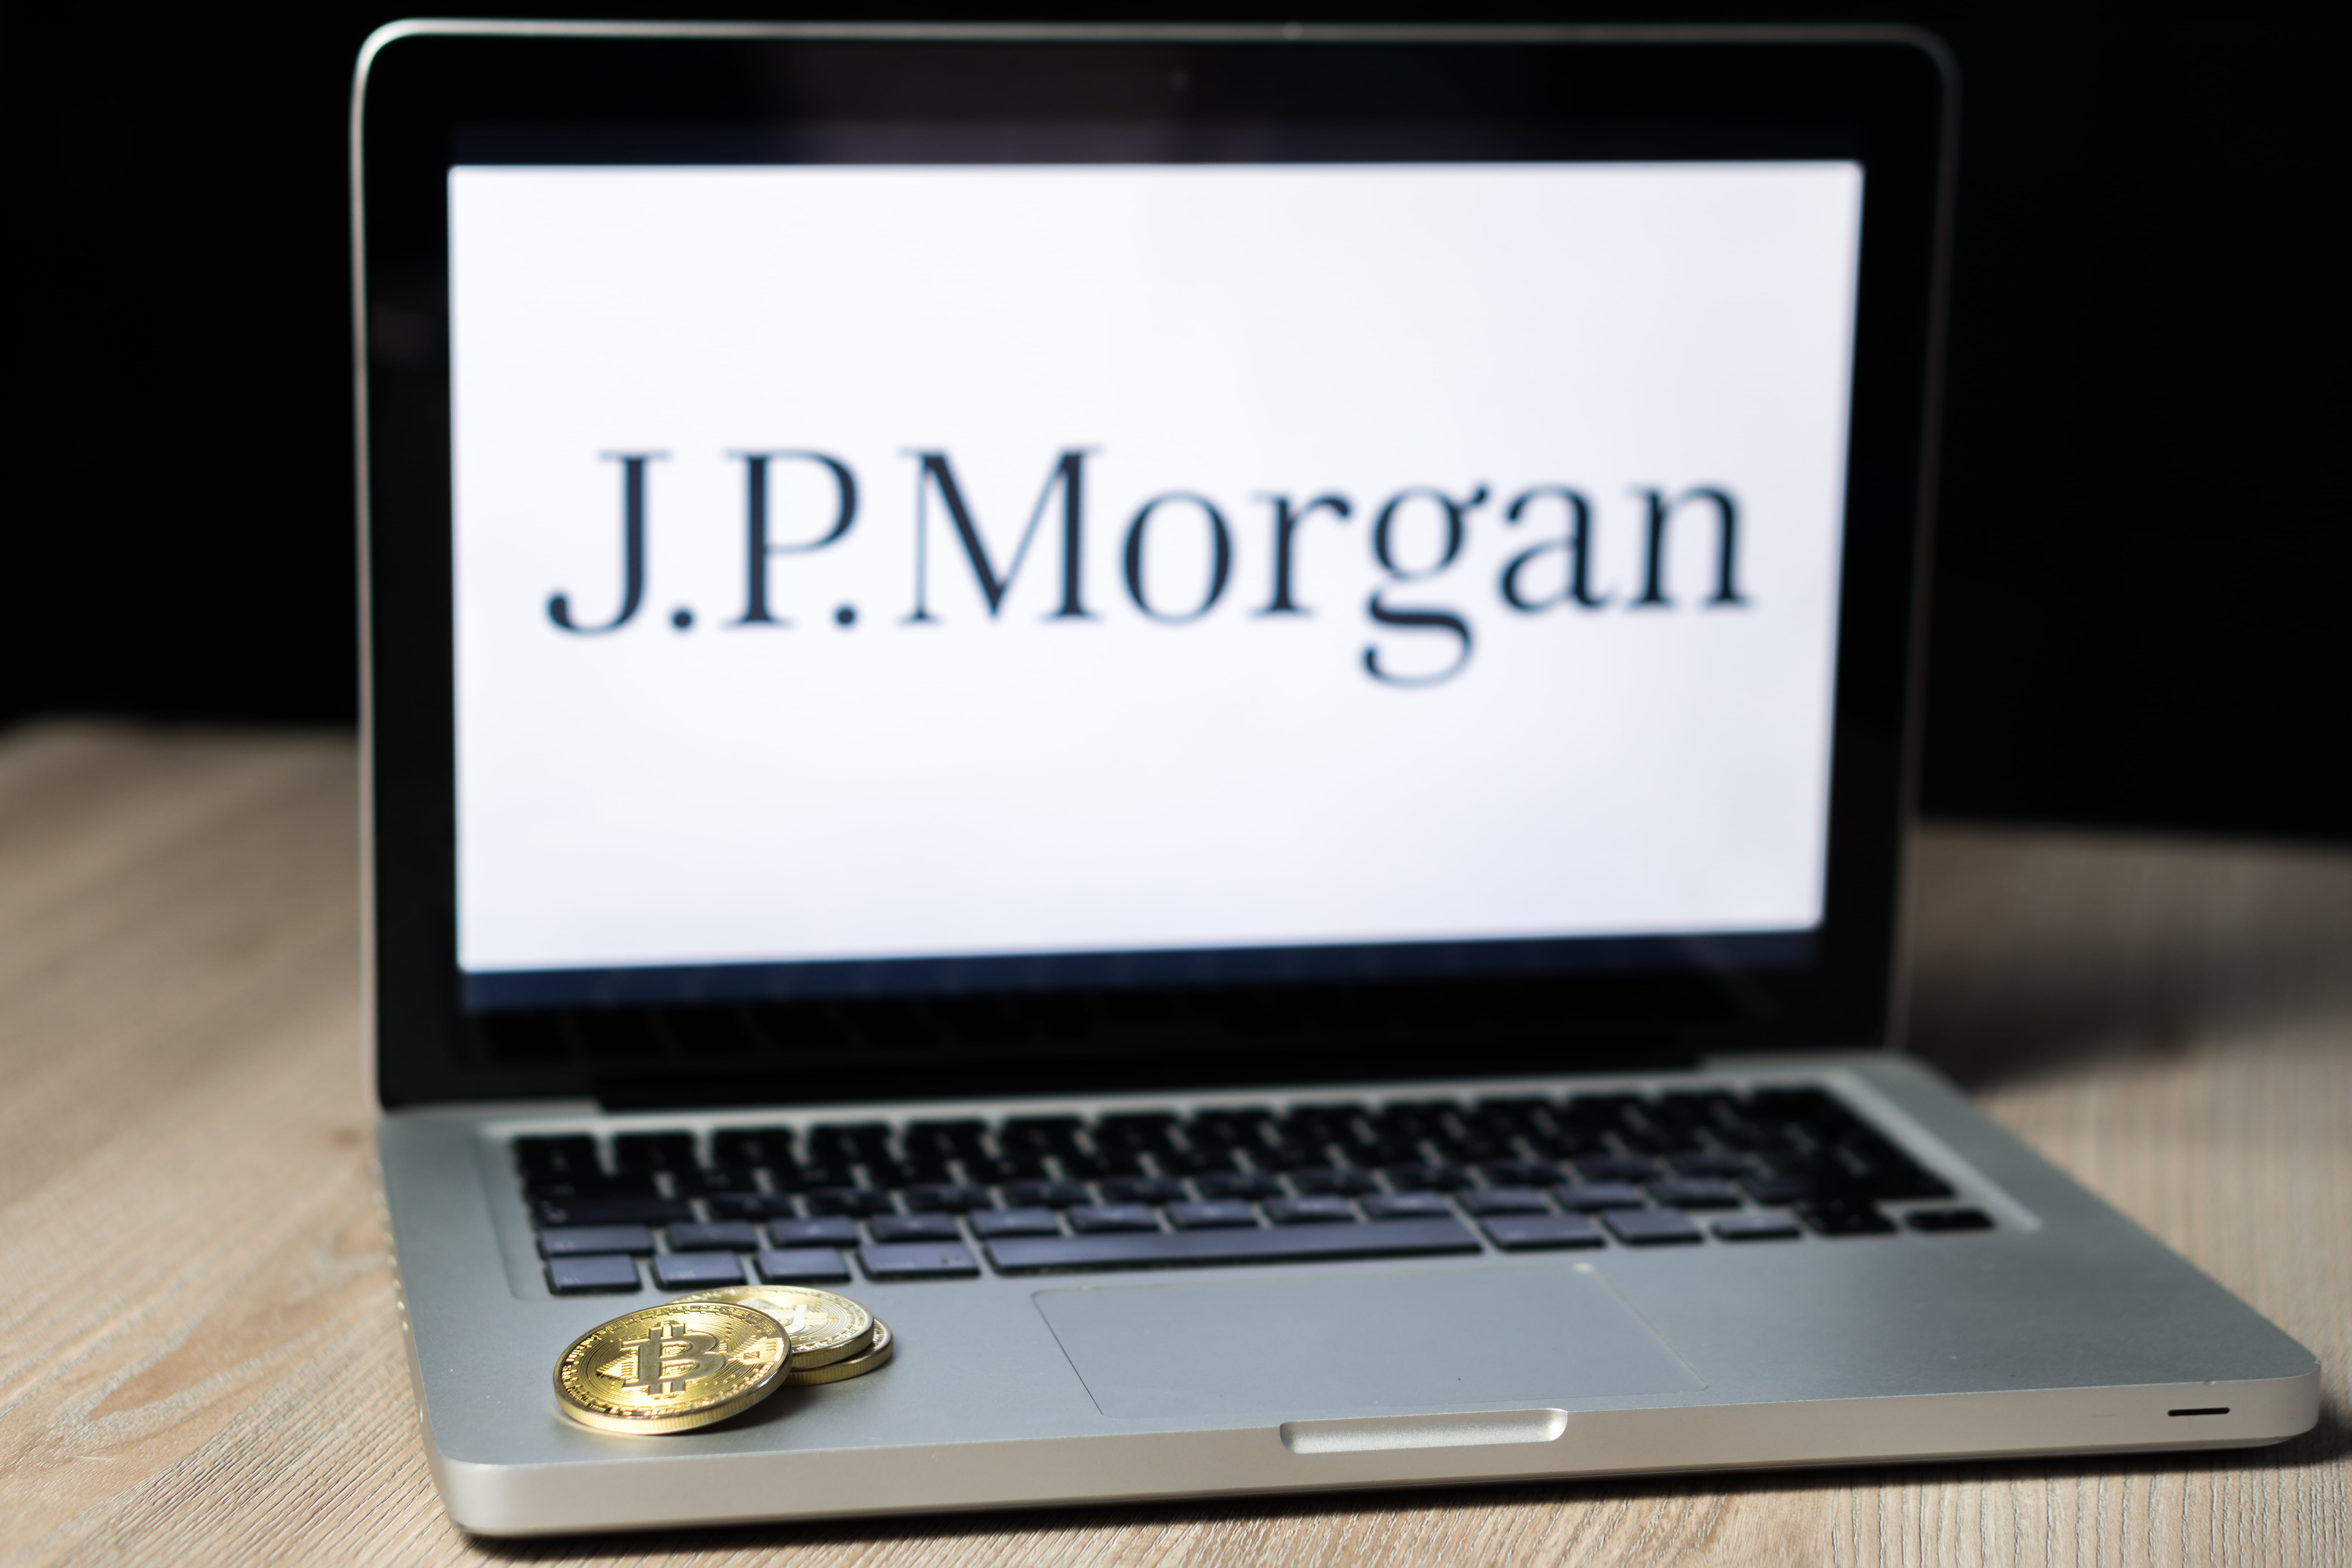 Bitcoin and XRP Beware? Industry Reacts to JP Morgan ‘JPM Coin’ Crypto Announcement